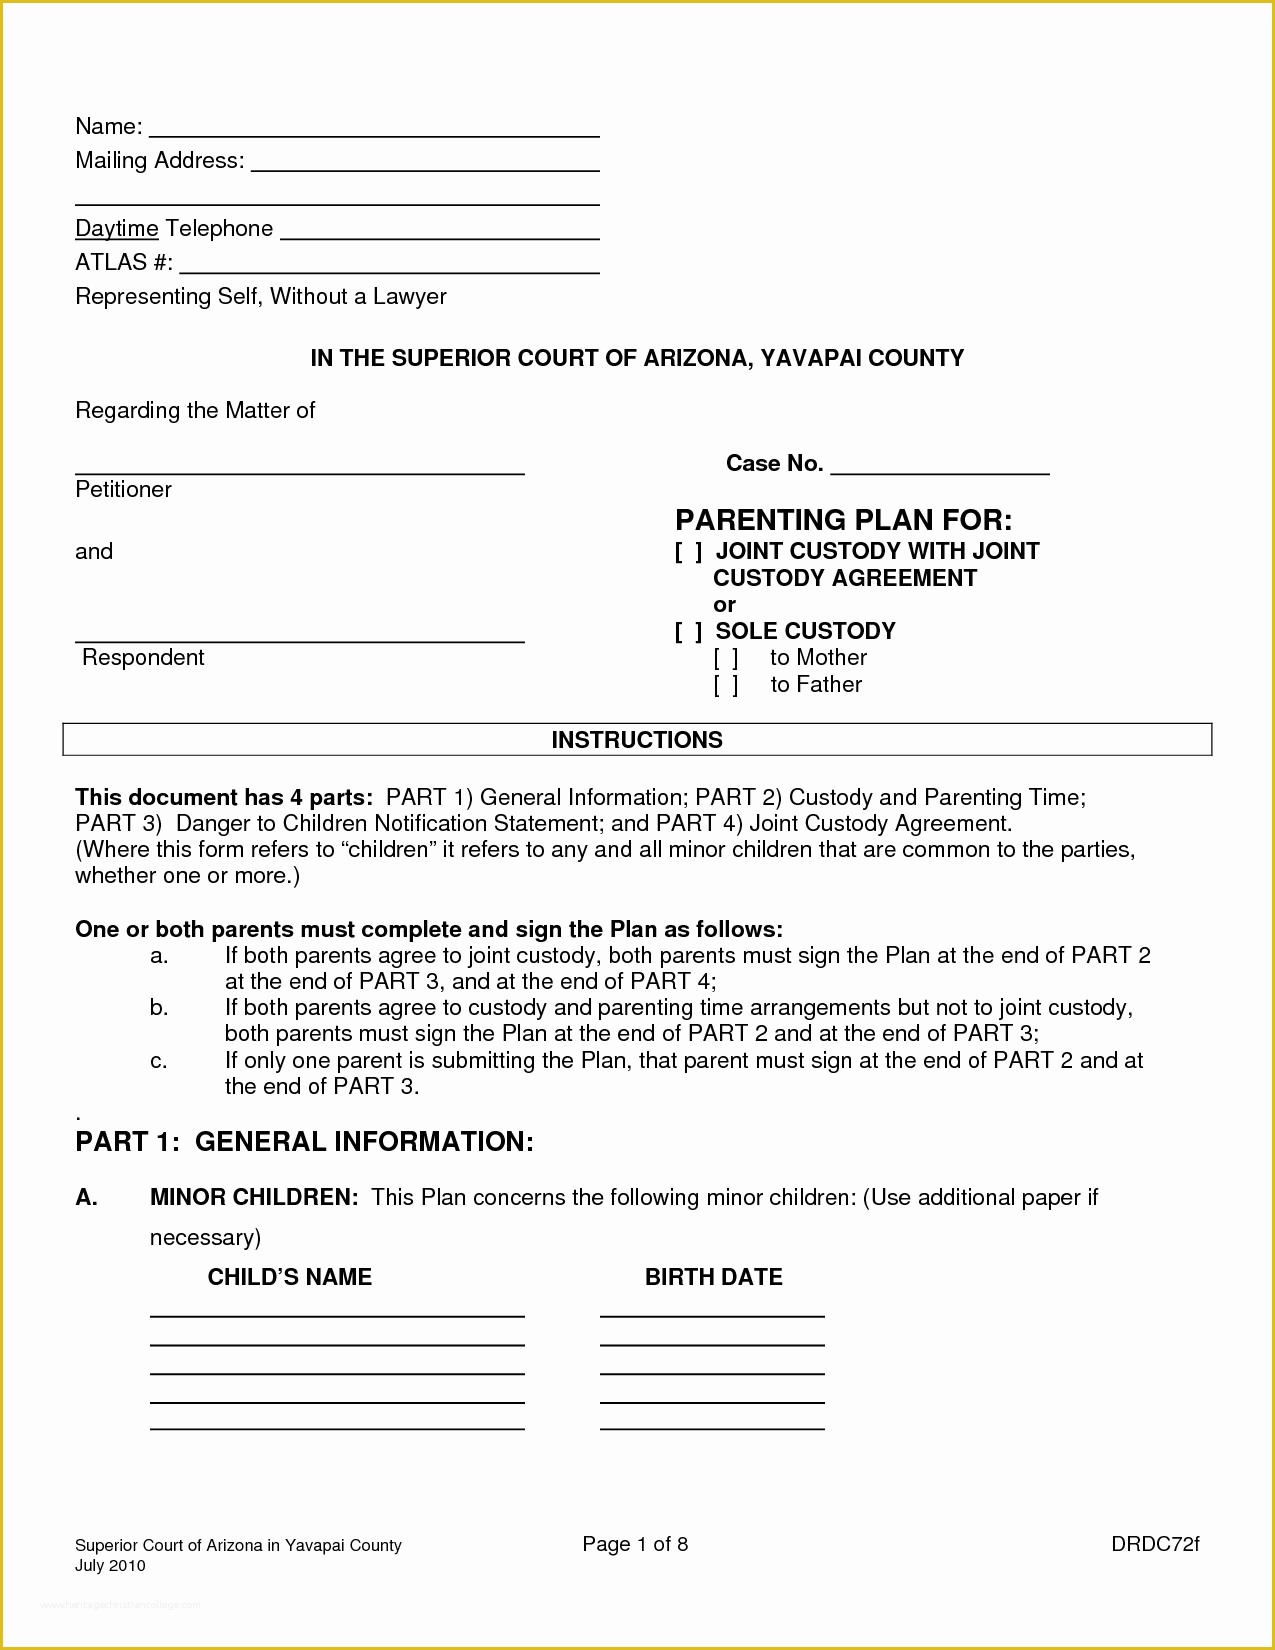 Free Custody Agreement Template Of Best S Of Parenting Plan forms Joint Custody